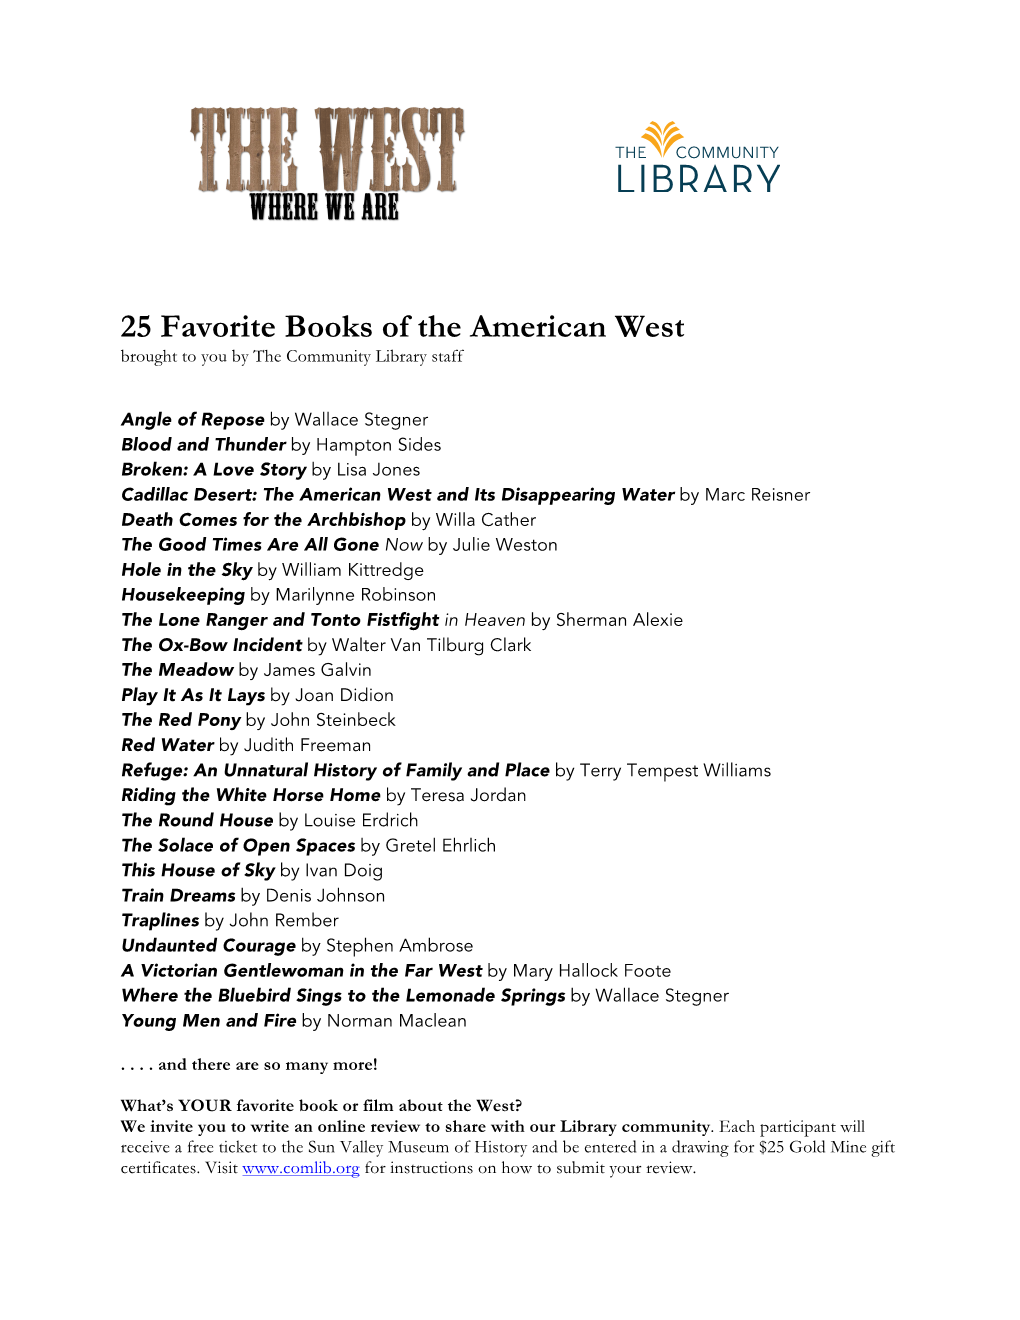 25 Favorite Books of the American West Brought to You by the Community Library Staff